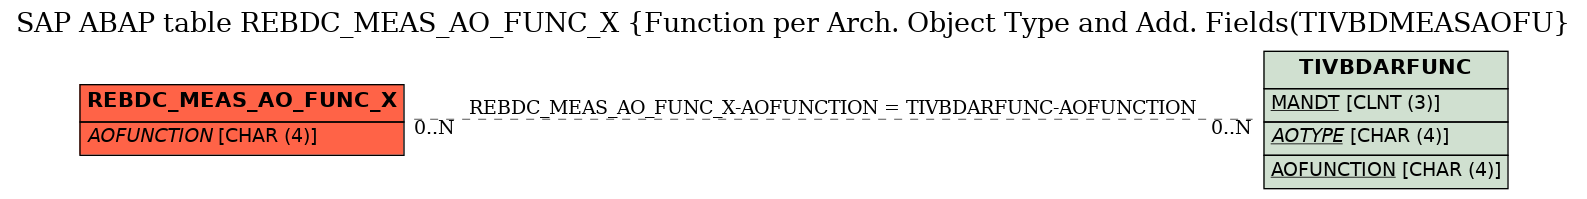 E-R Diagram for table REBDC_MEAS_AO_FUNC_X (Function per Arch. Object Type and Add. Fields(TIVBDMEASAOFU)